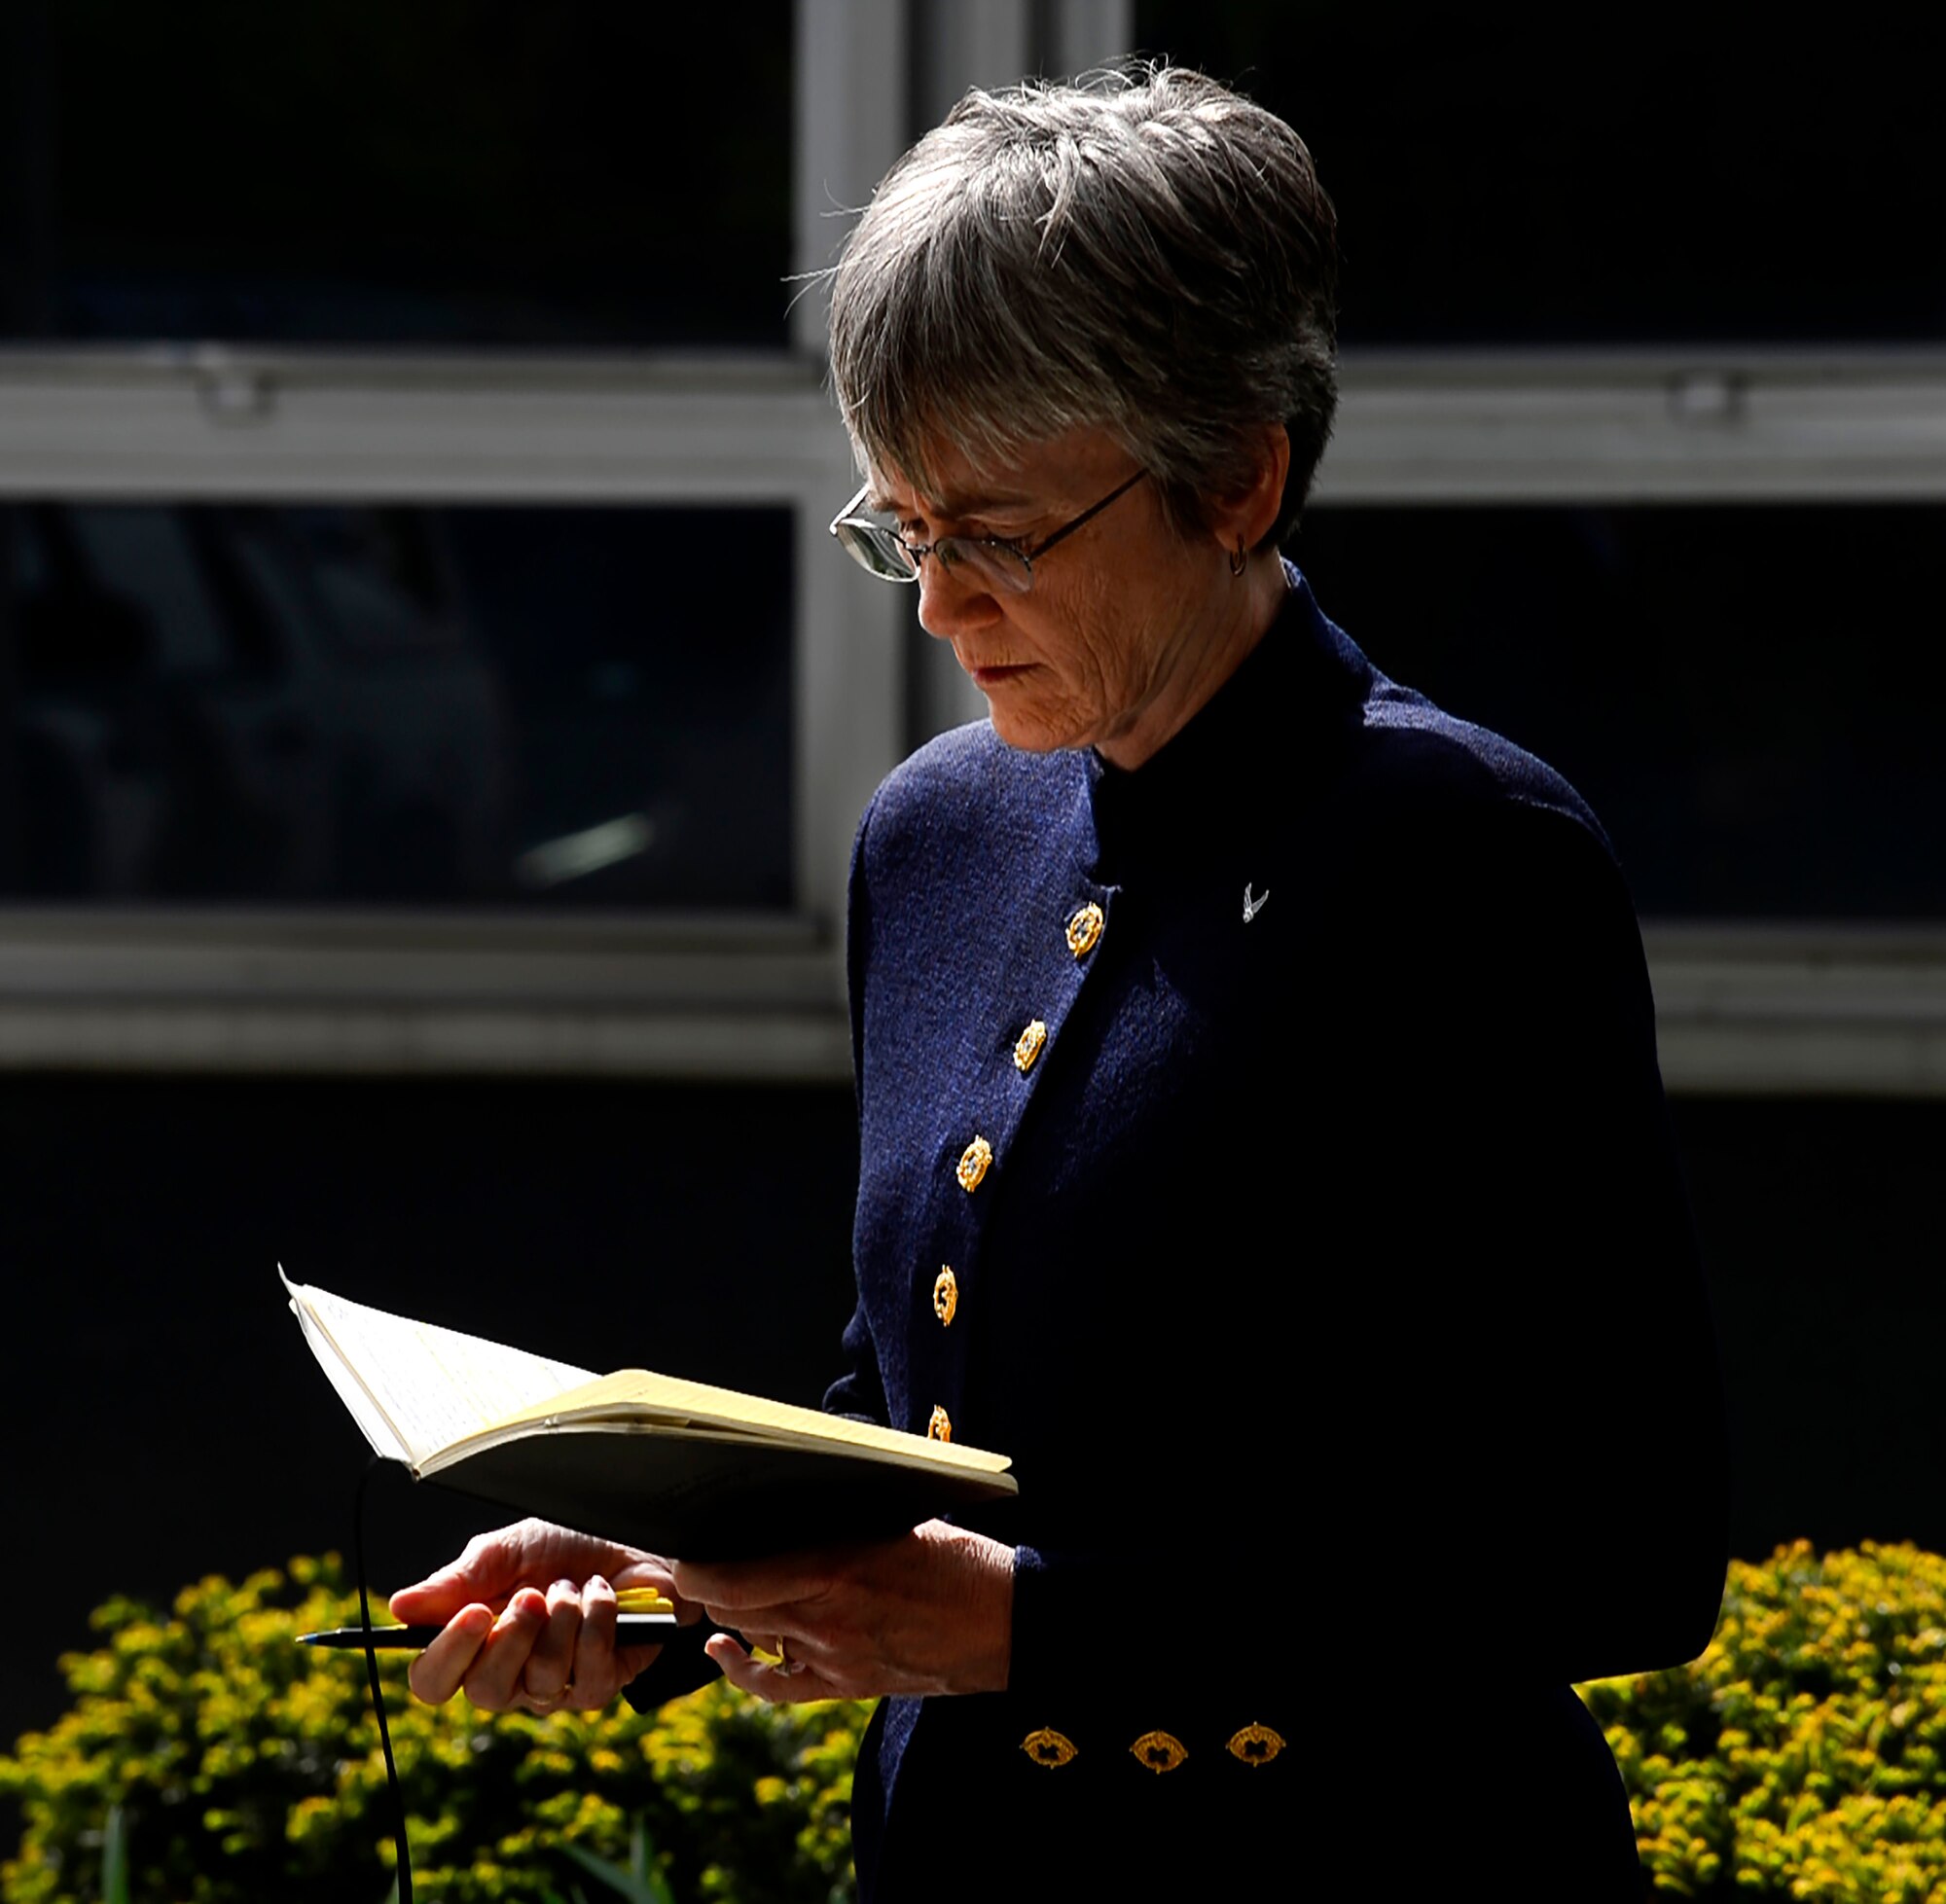 Secretary of the Air Force Heather Wilson prepares her notes after an office call with the U.S. Ambassador to Poland Georgette Mosbacher during an office call in Warsaw, Poland, April 25, 2019. (U.S. Air Force photo by Staff Sgt. Rusty Frank)